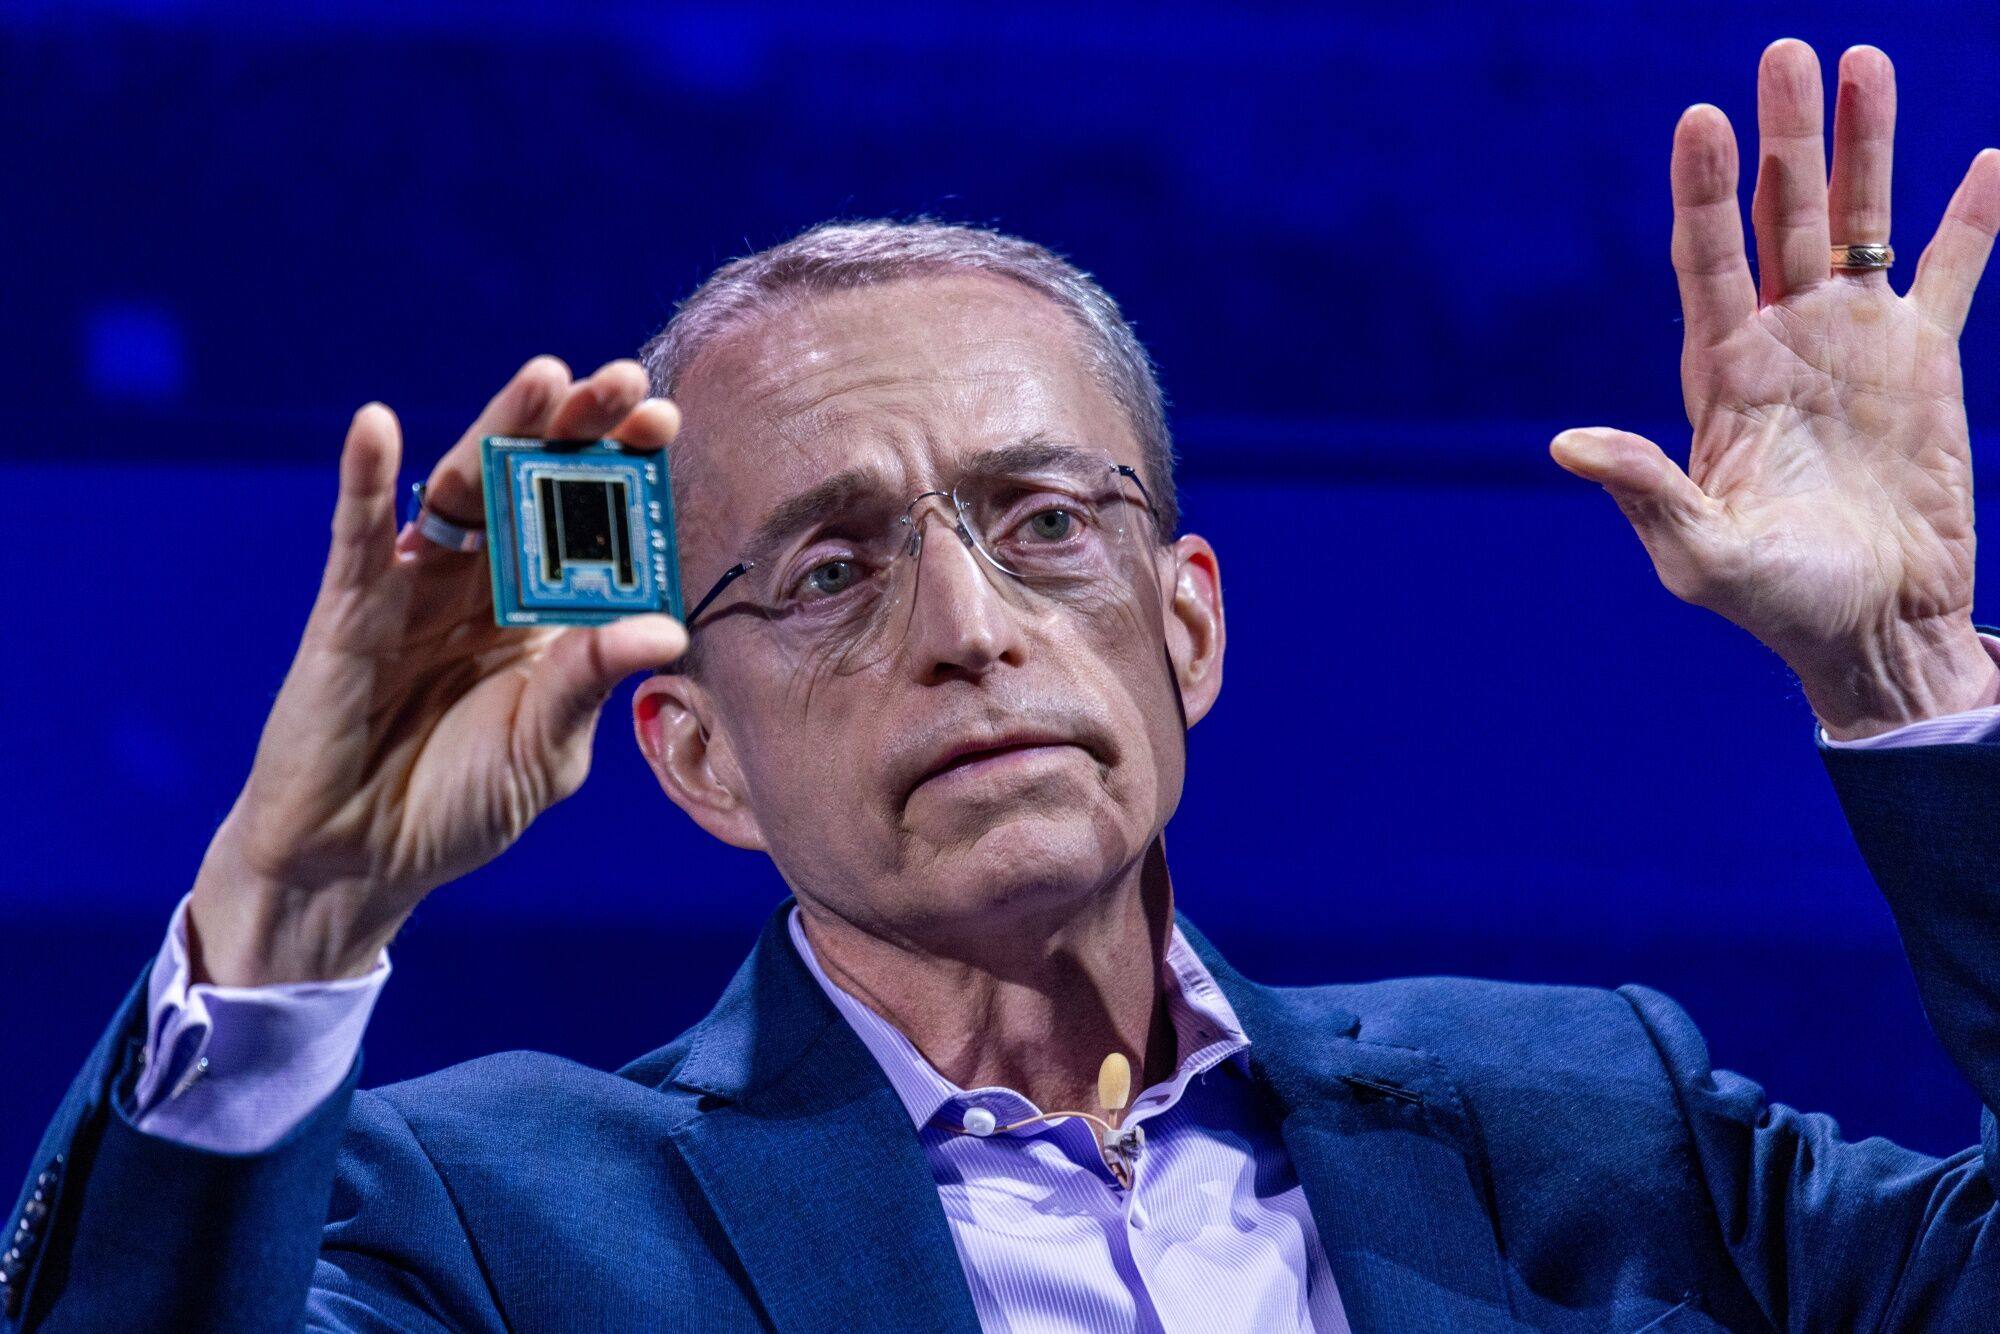 Intel CEO Pat Gelsinger held an AI processor during a speech at the Computex conference in Taipei. Photo: Bloomberg